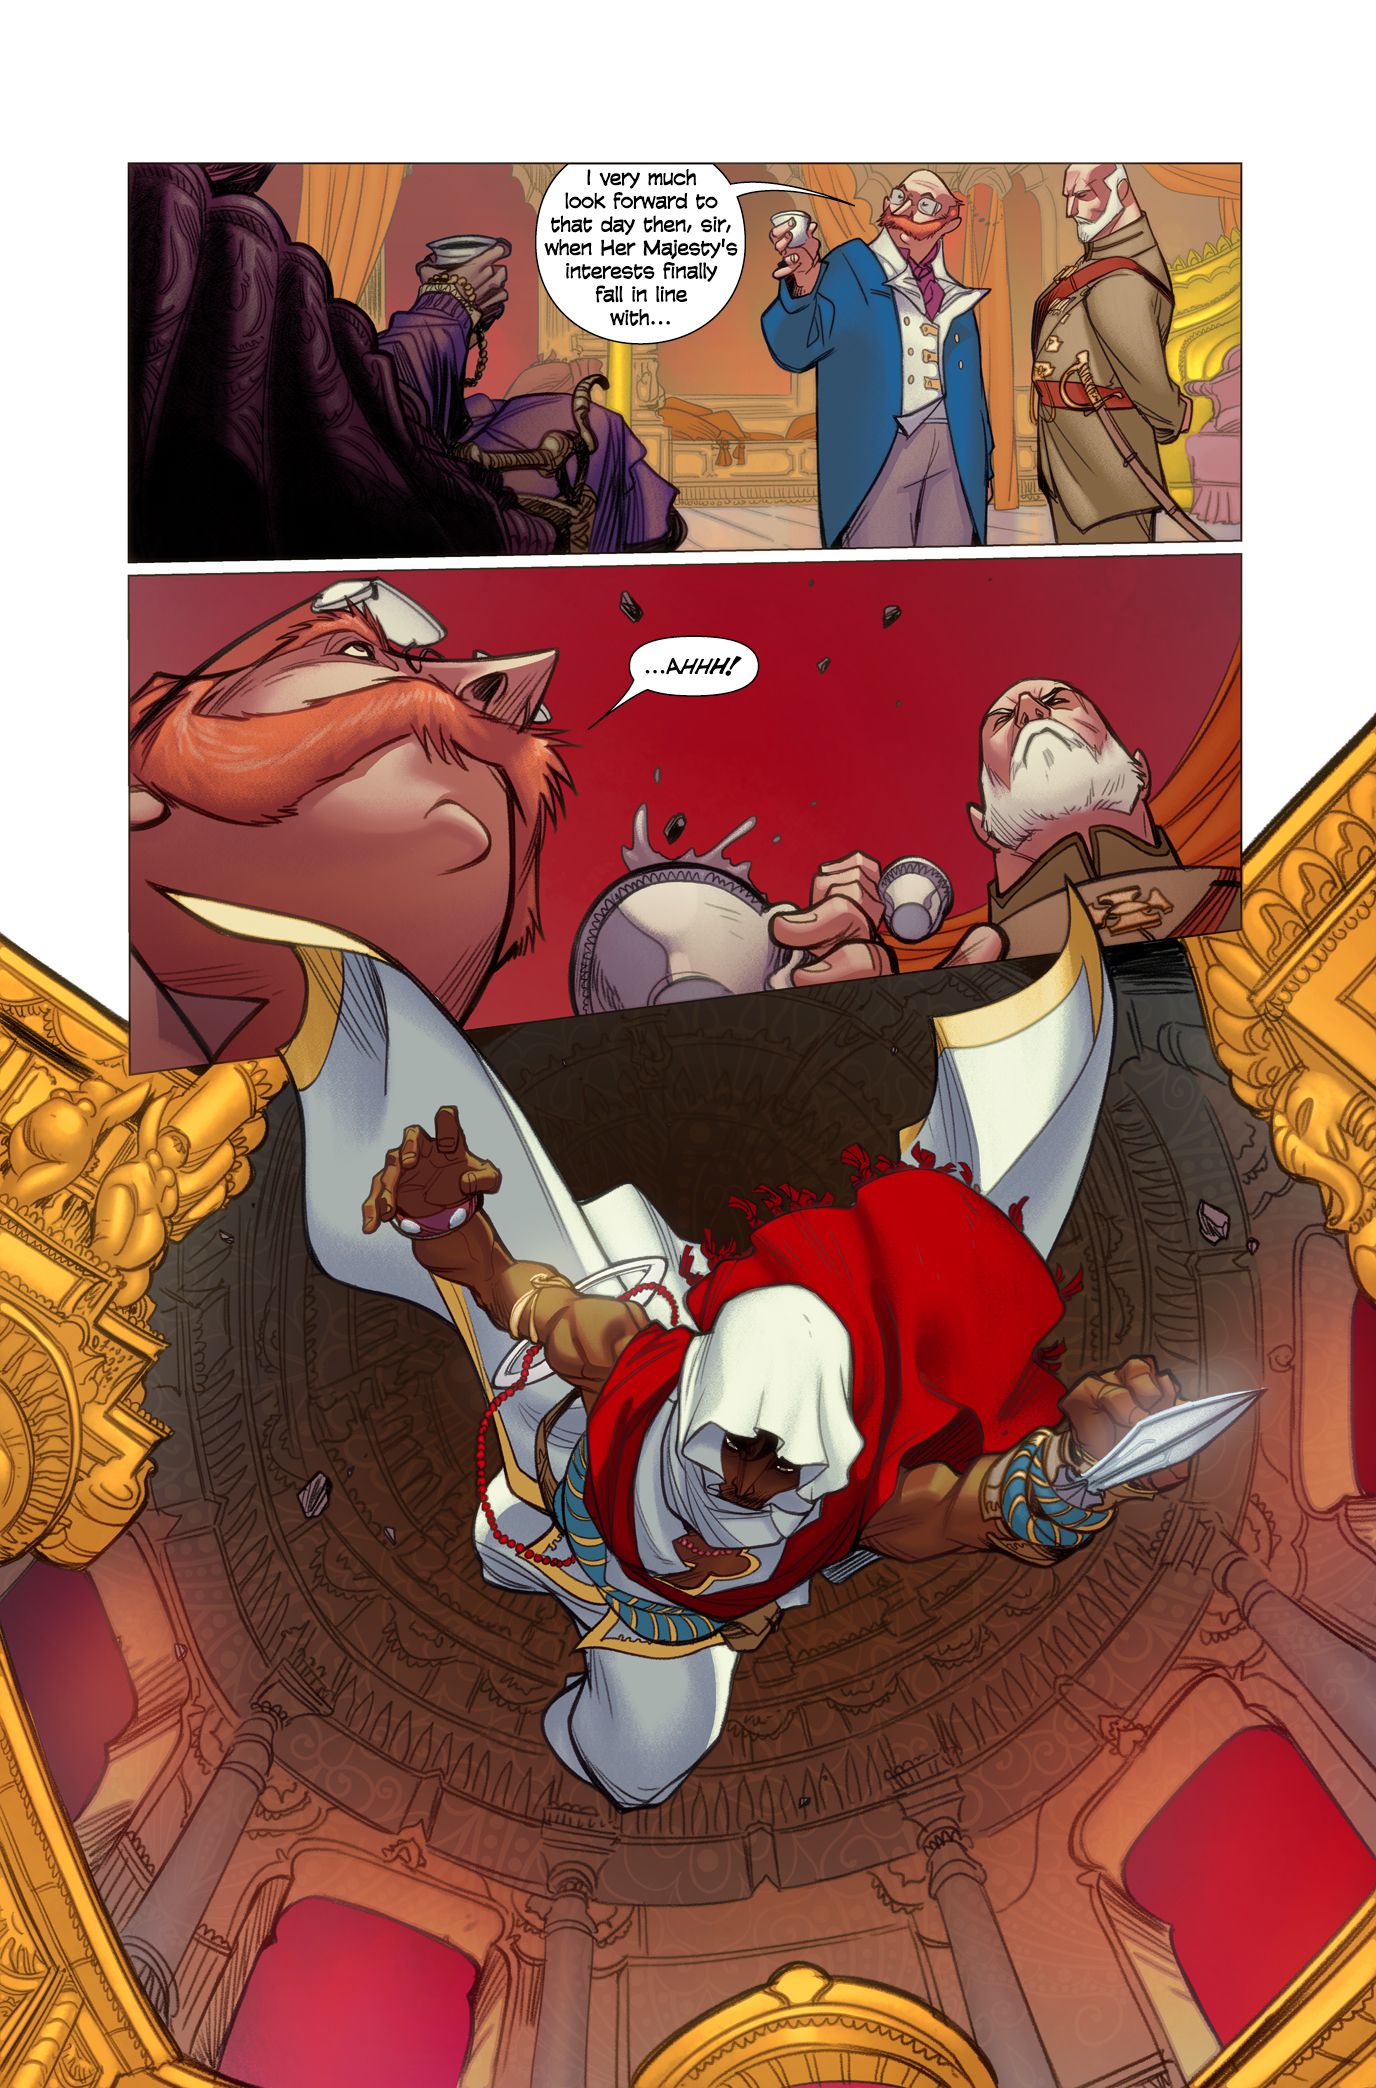 Assassins Creed Brahman Graphic Novel Set In India Introduces New